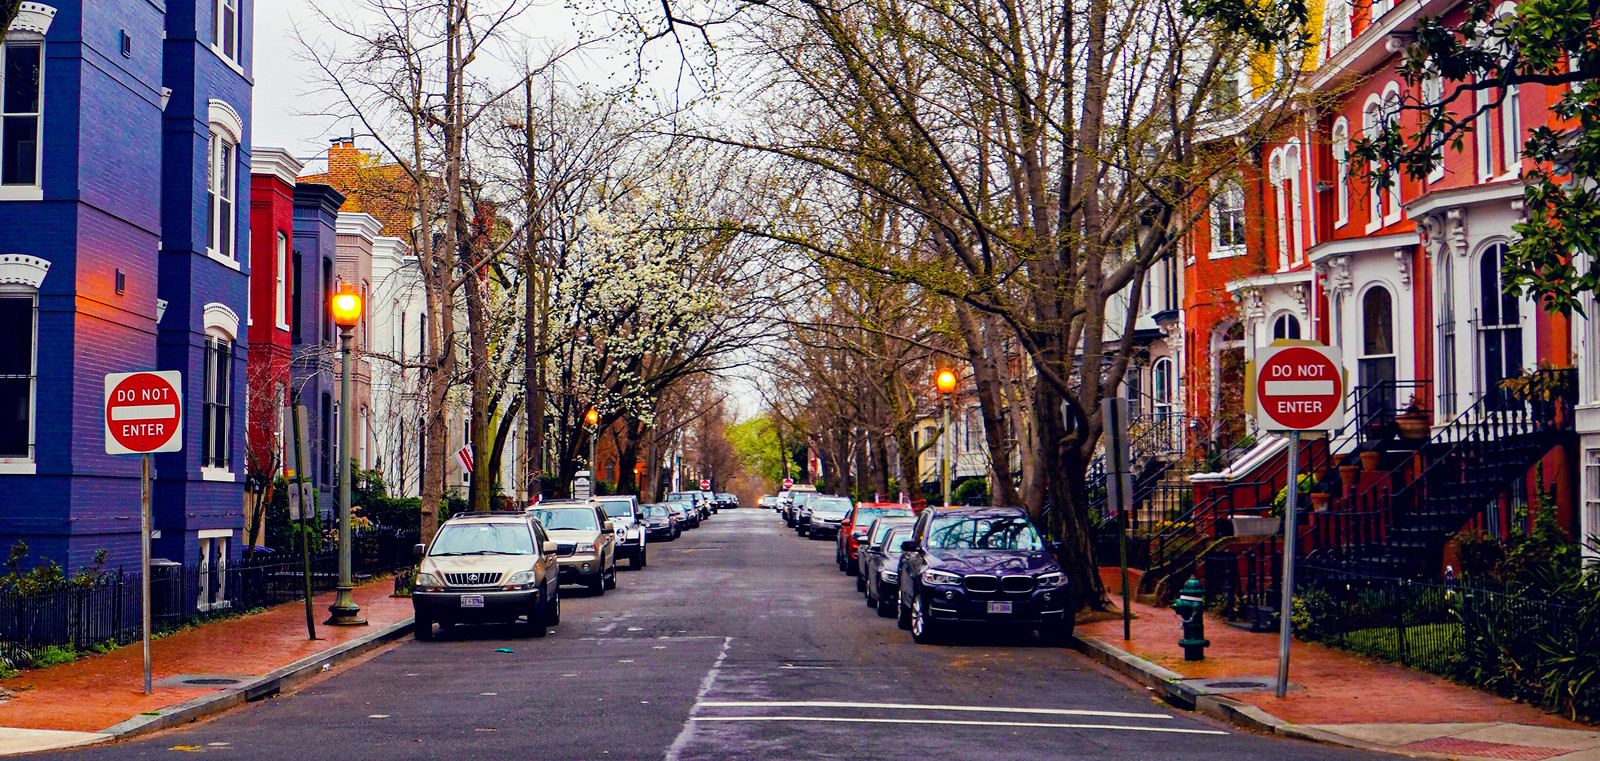 Thanks for Publishing my Photo, UrbanTurf, in How Well is DC Doing at Social Distancing?